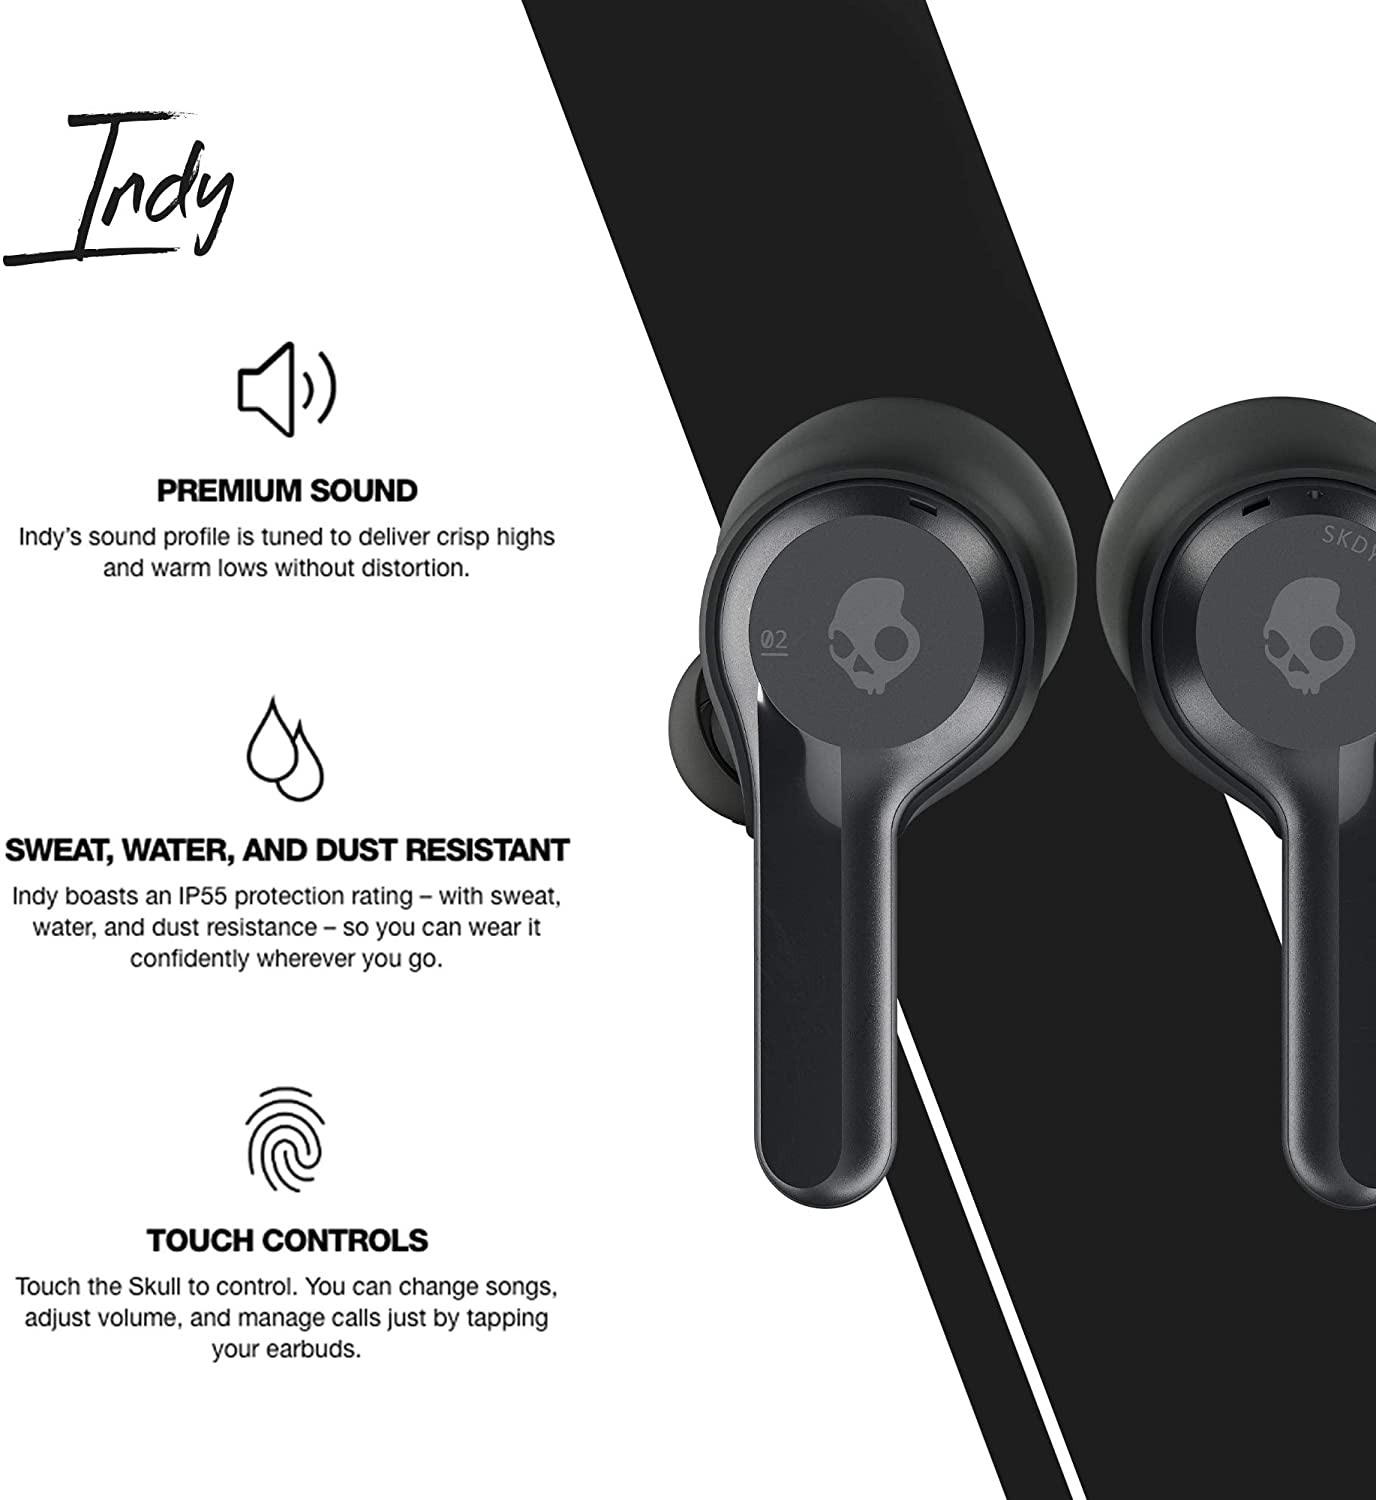 Skullcandy Indy Earbuds Features